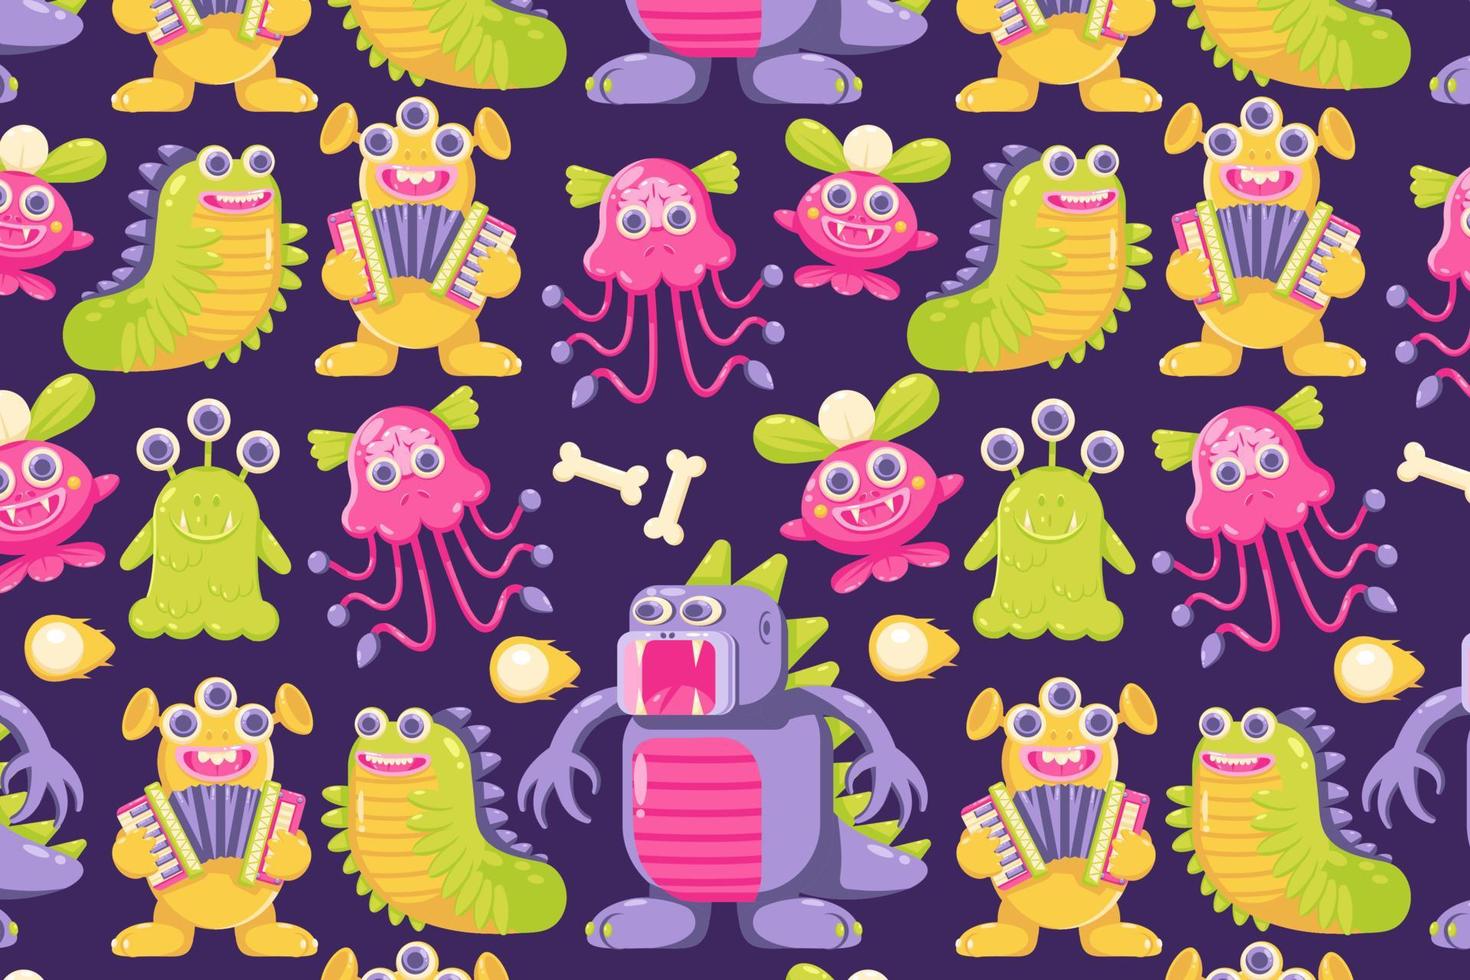 Cute monsters. Caterpillar patterns, crocodiles, playing music and jellyfish monsters vector